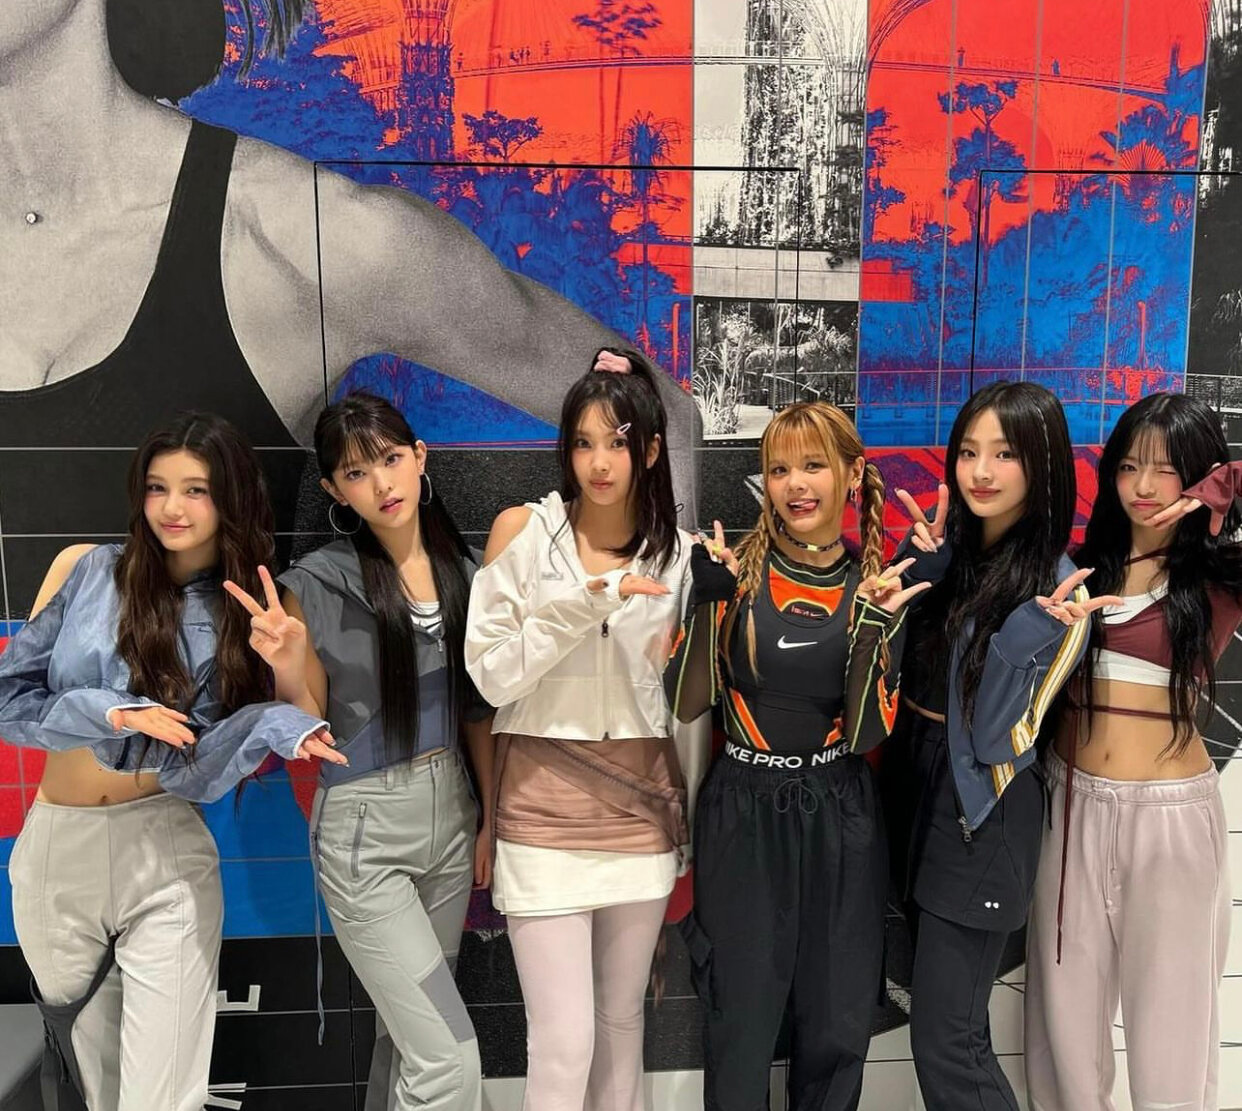 NewJeans' “Get Up” Becomes 1st K-Pop Girl Group Album To Chart In Top 20 Of  Billboard 200 For 4 Weeks